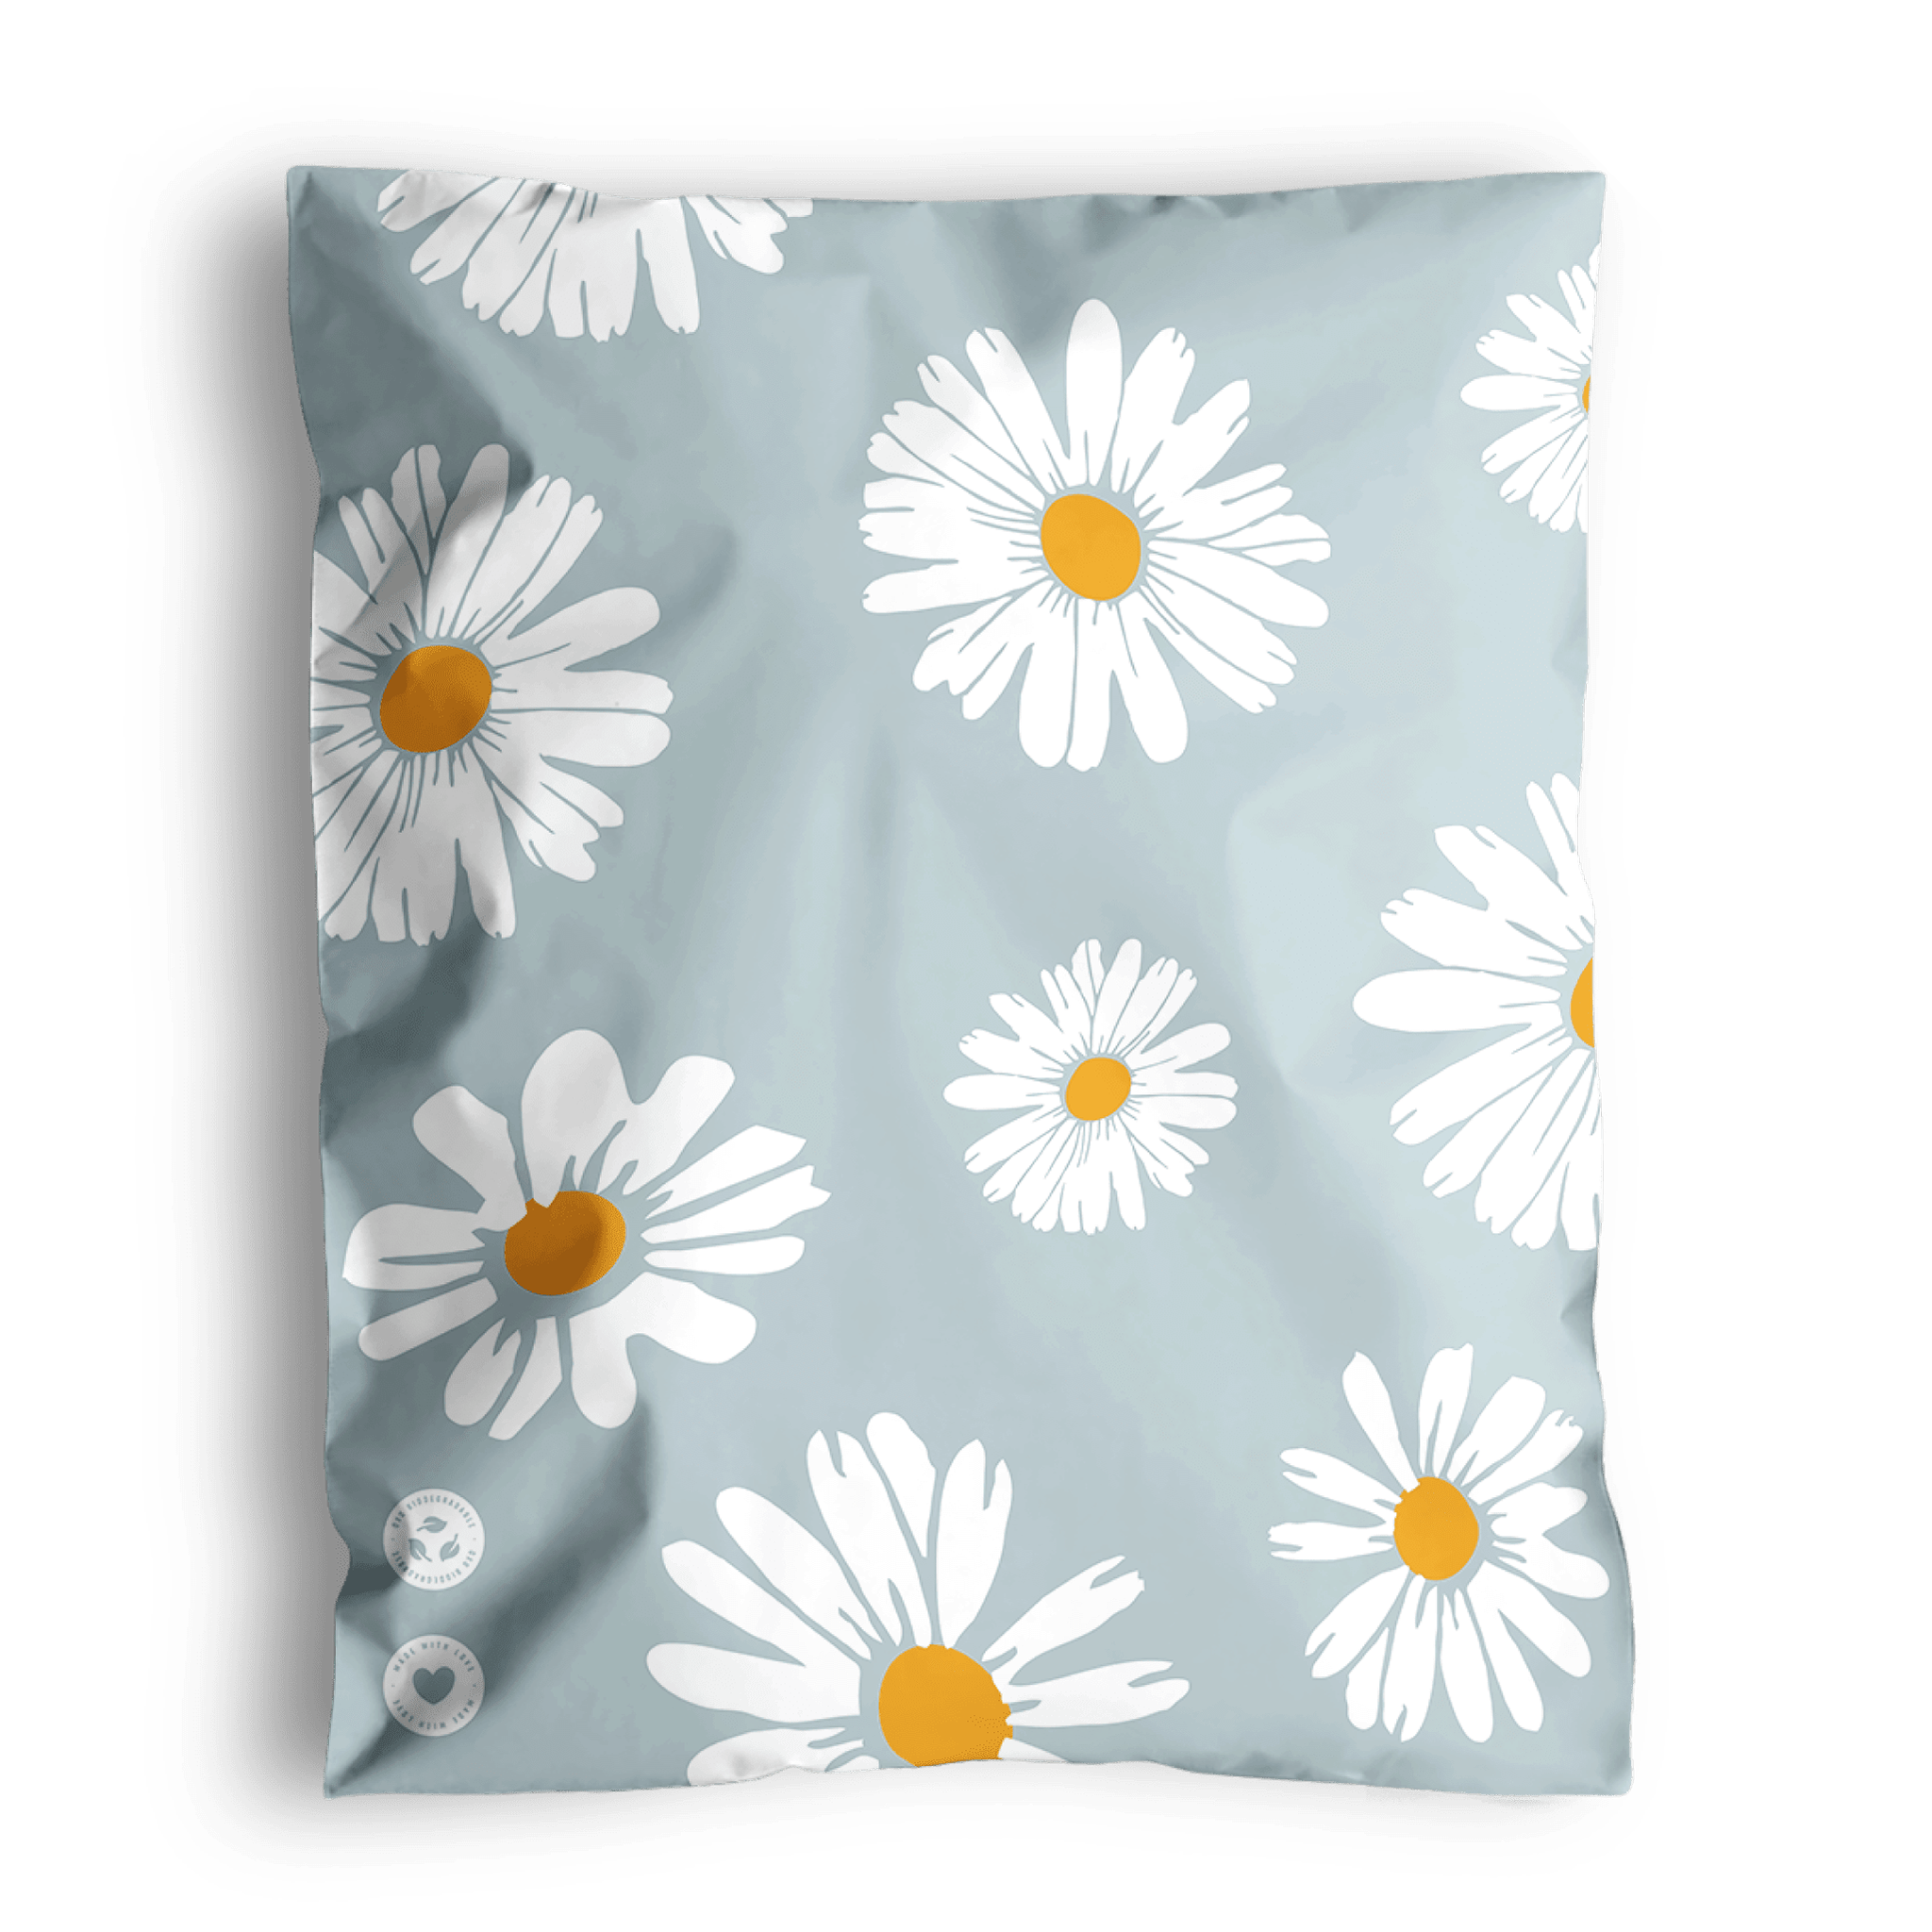 Cushion with daisy print design on a grey background, shipped in Daisy White Biodegradable Mailers 10" x 13" from impack.co.